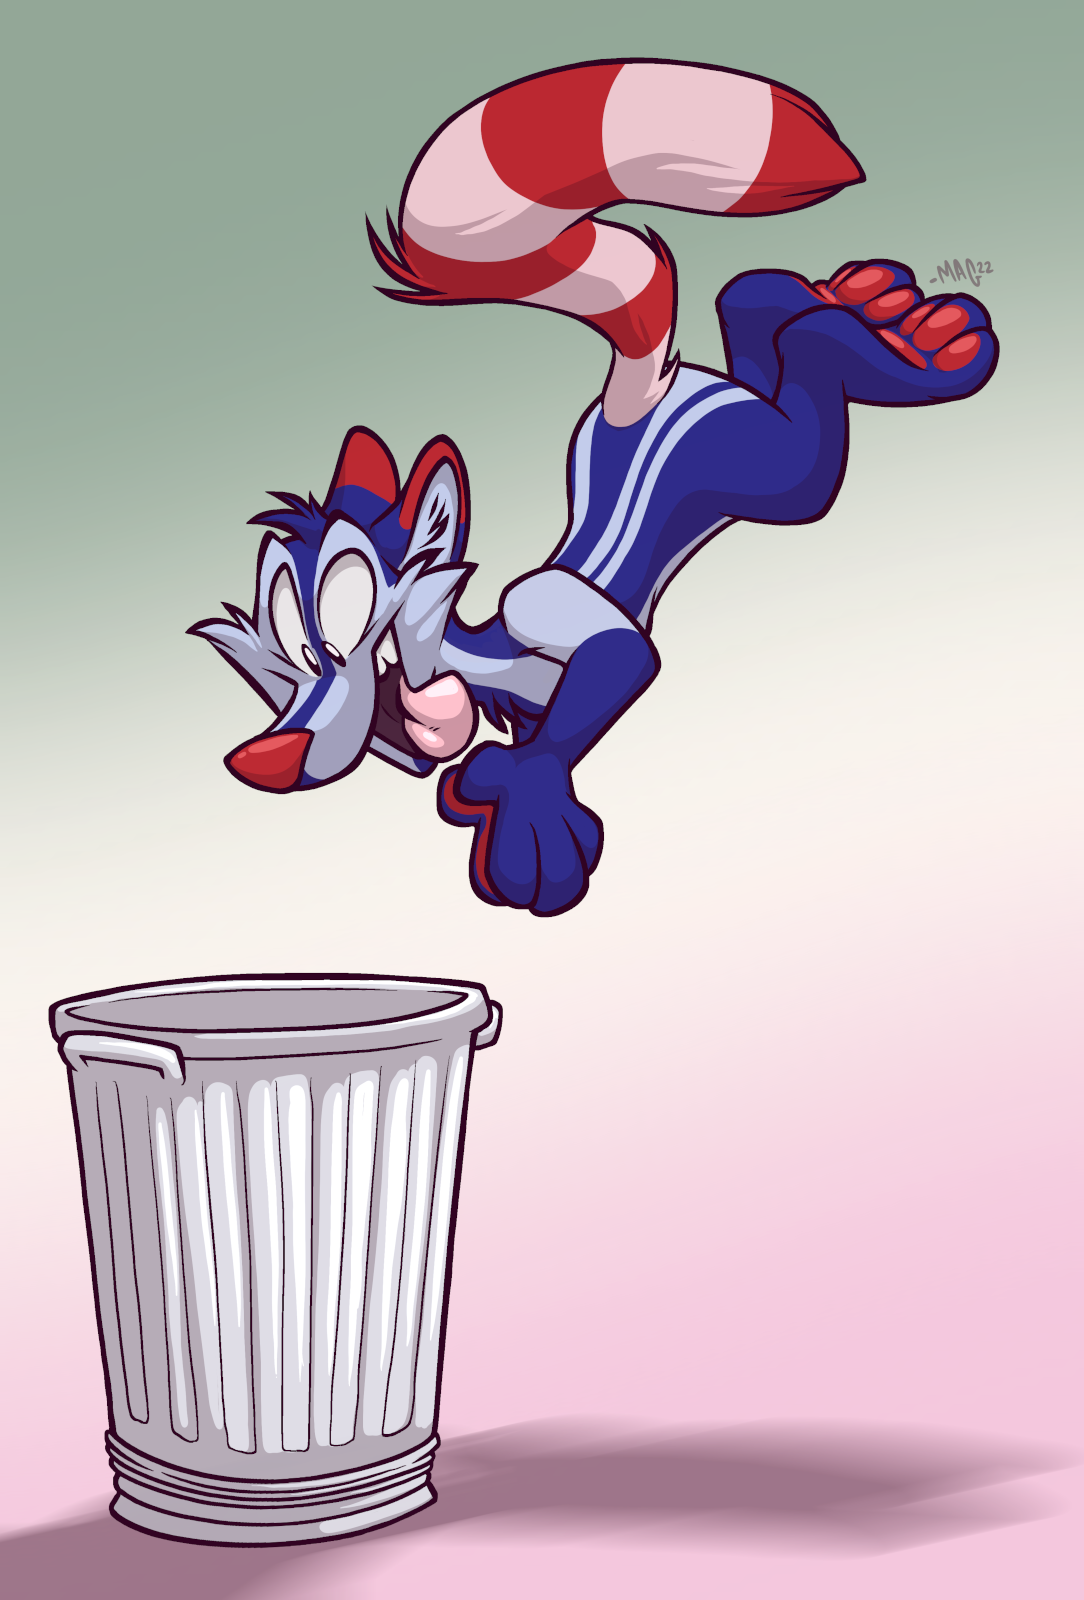 Professional Trash Diver - Do Not Attempt by Mag Ferret